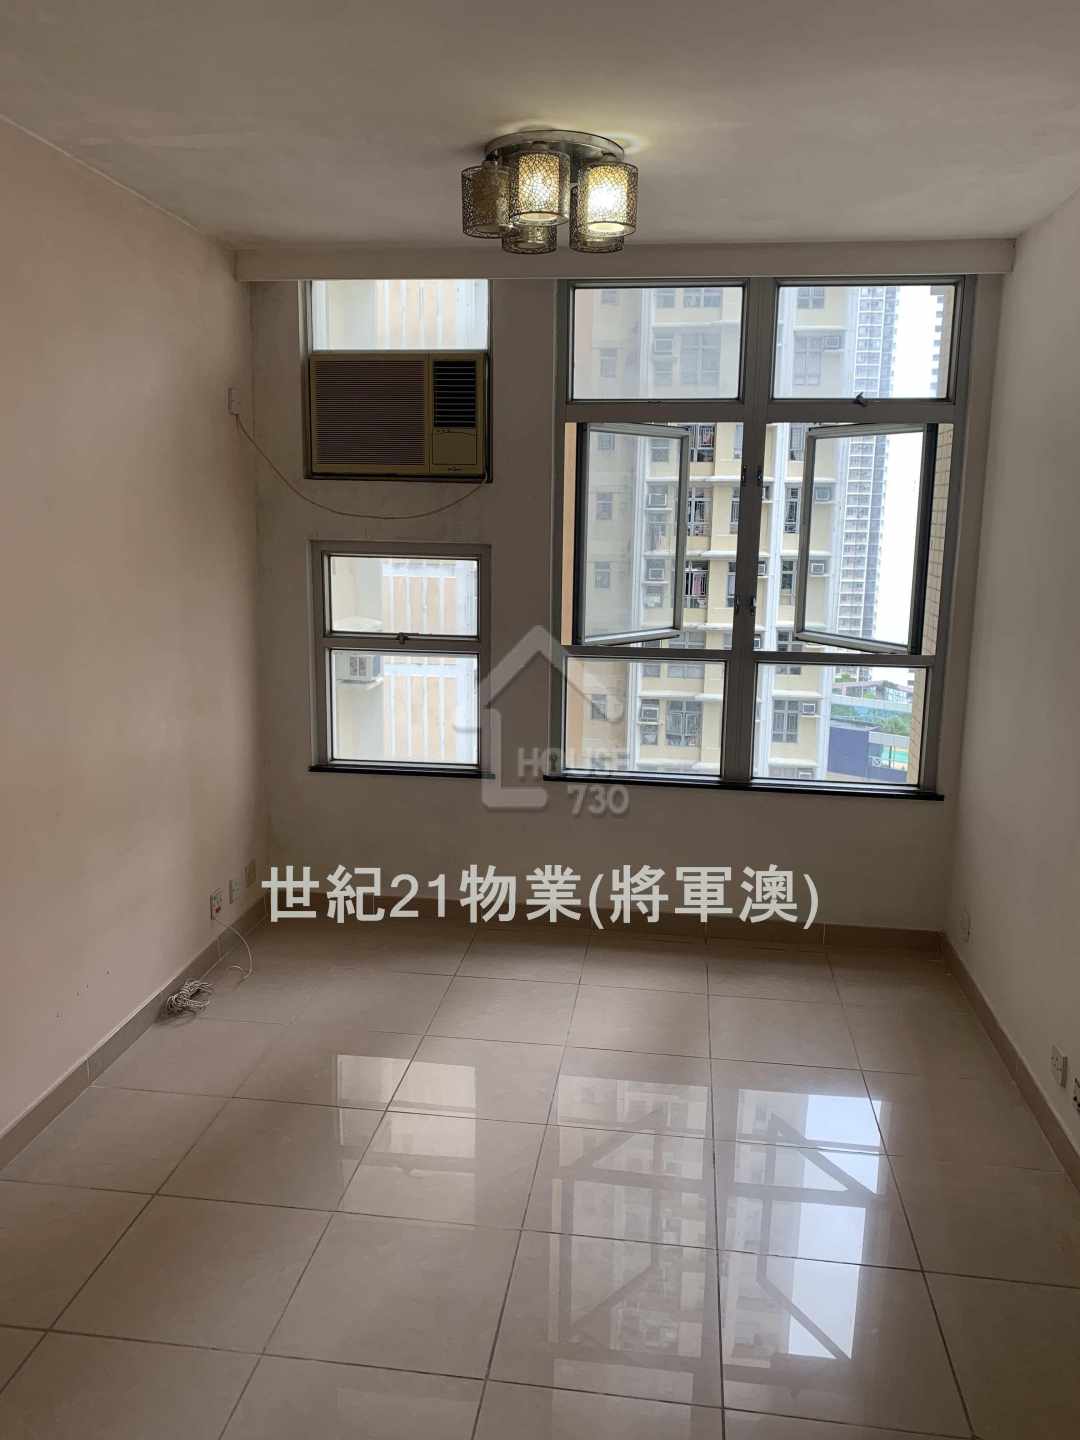 Tseung Kwan O CHOI MING COURT Middle Floor House730-7243437